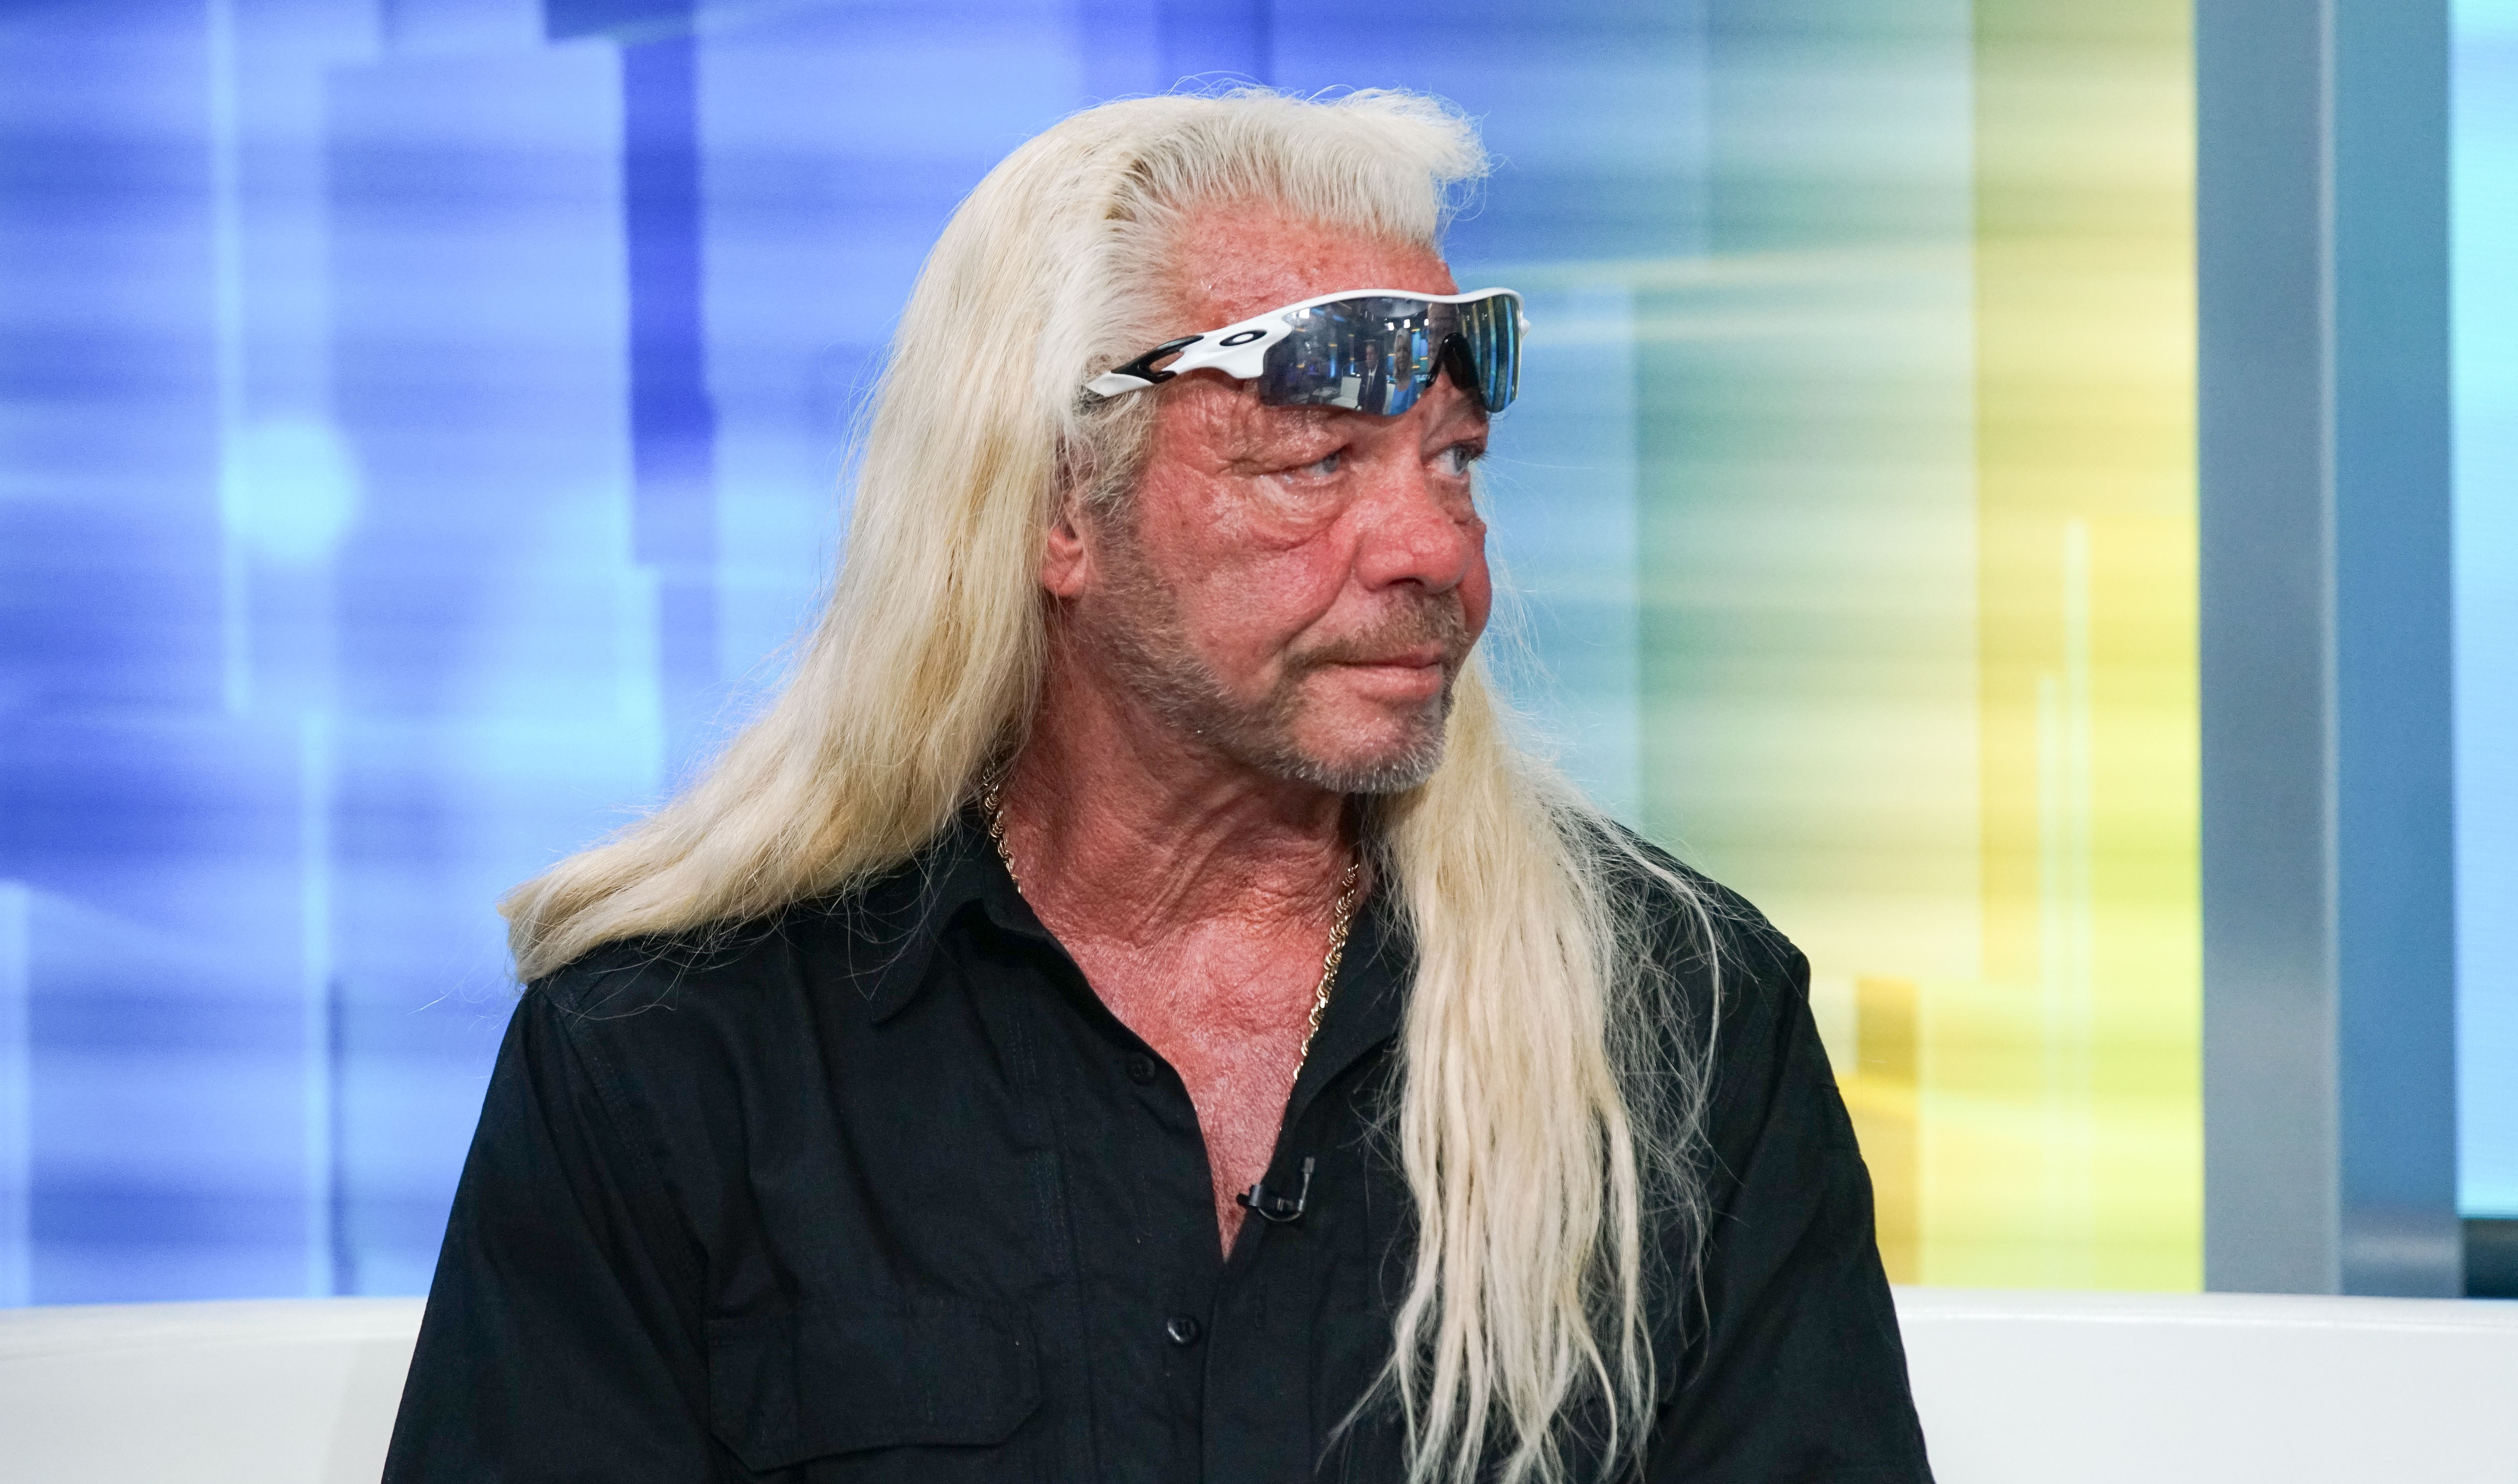 TV personality Duane Chapman aka Dog the Bounty Hunter at "FOX & Friends" at FOX Studios on August 28, 2019 | Photo: Getty Images